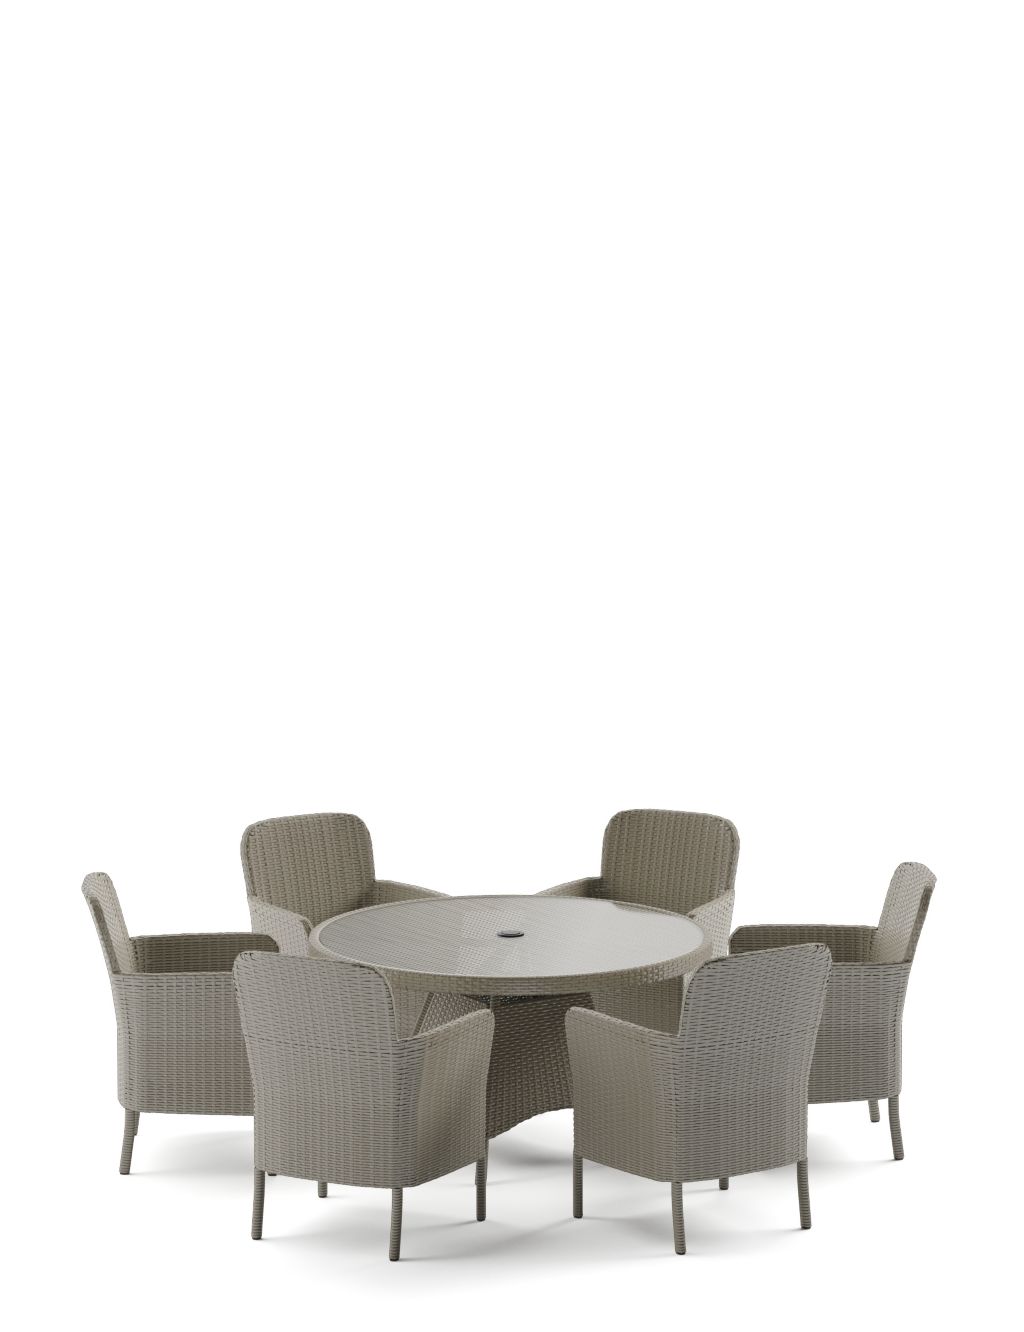 Marlow 6 Seater Rattan Effect Round Garden Table & Chairs 1 of 5